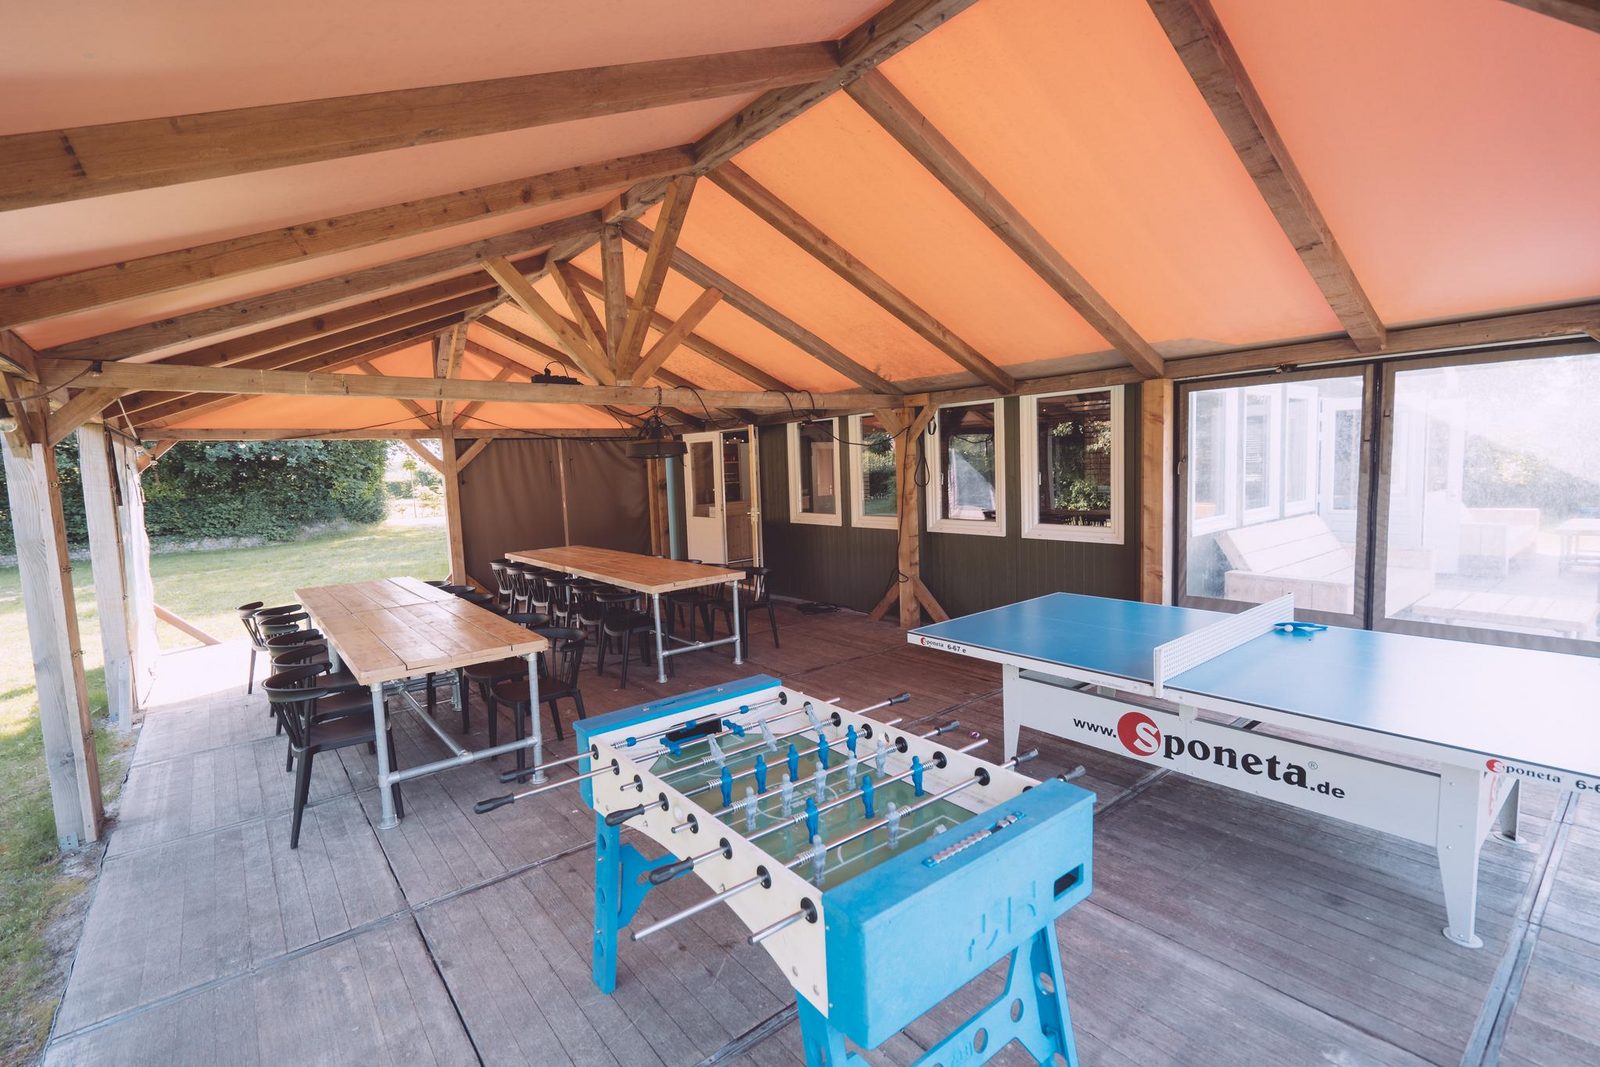 Group accommodation: 'Het Strandhuis' + 4 comfortable houses (24 people)